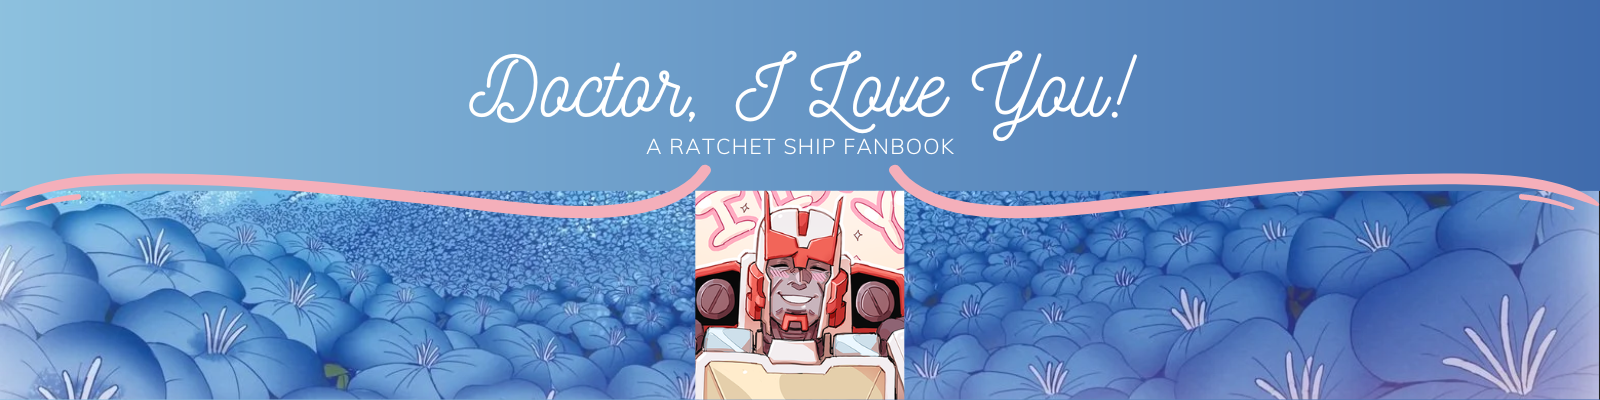 Doctor, I Love You! - A Ratchet Ship Fanbook